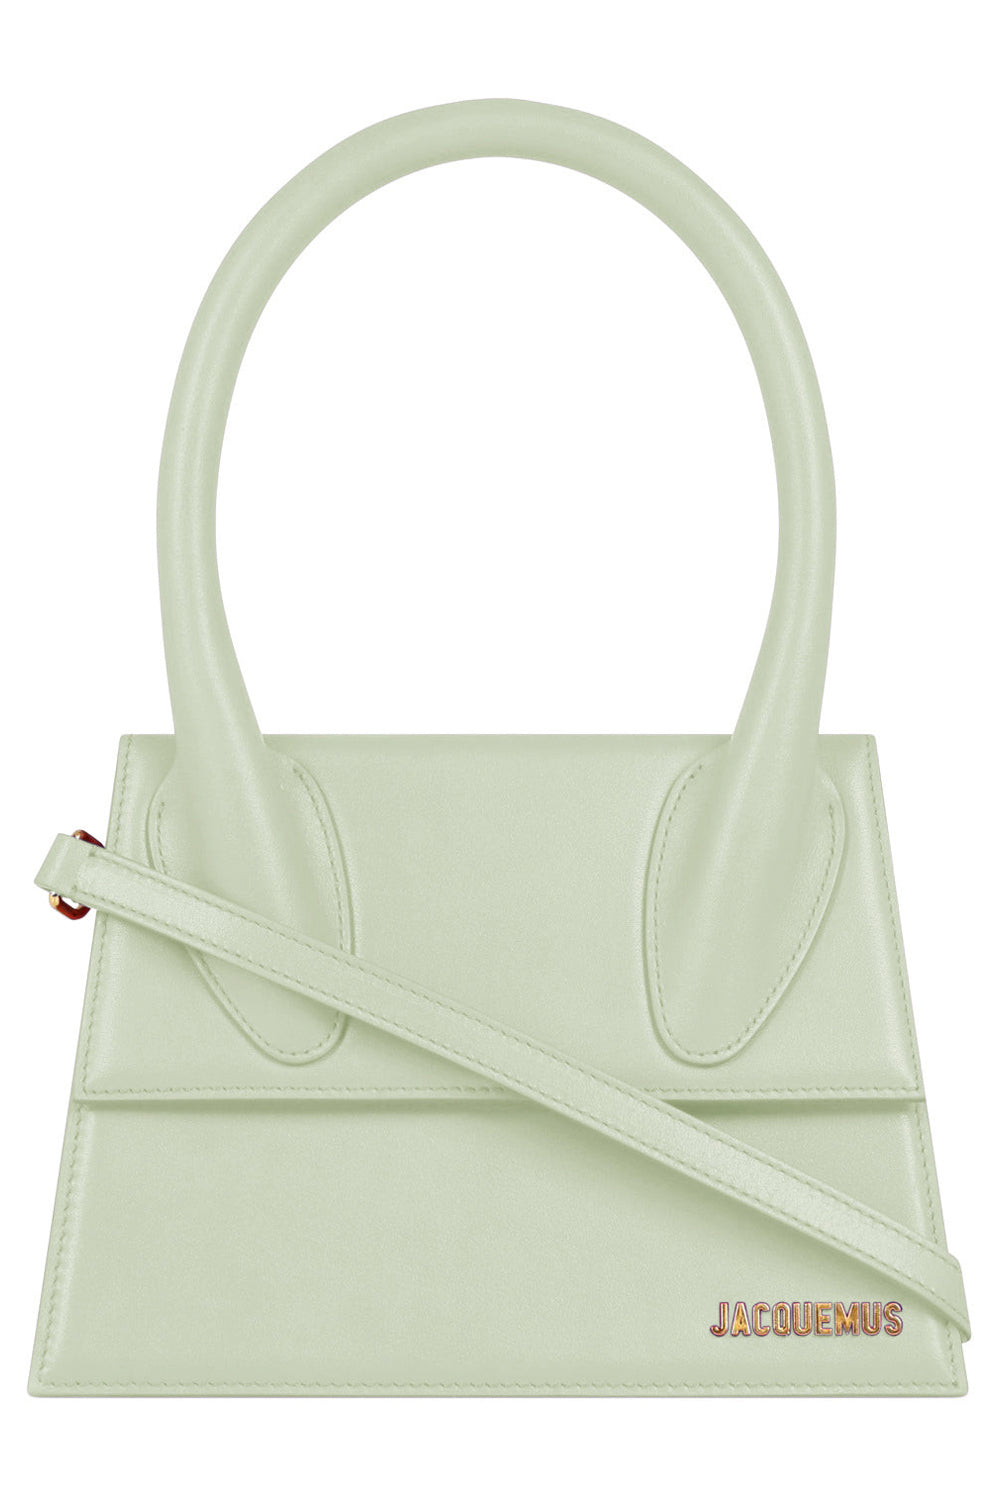 JACQUEMUS BAGS GREEN LE GRAND CHIQUITO BAG | LIGHT GREEN